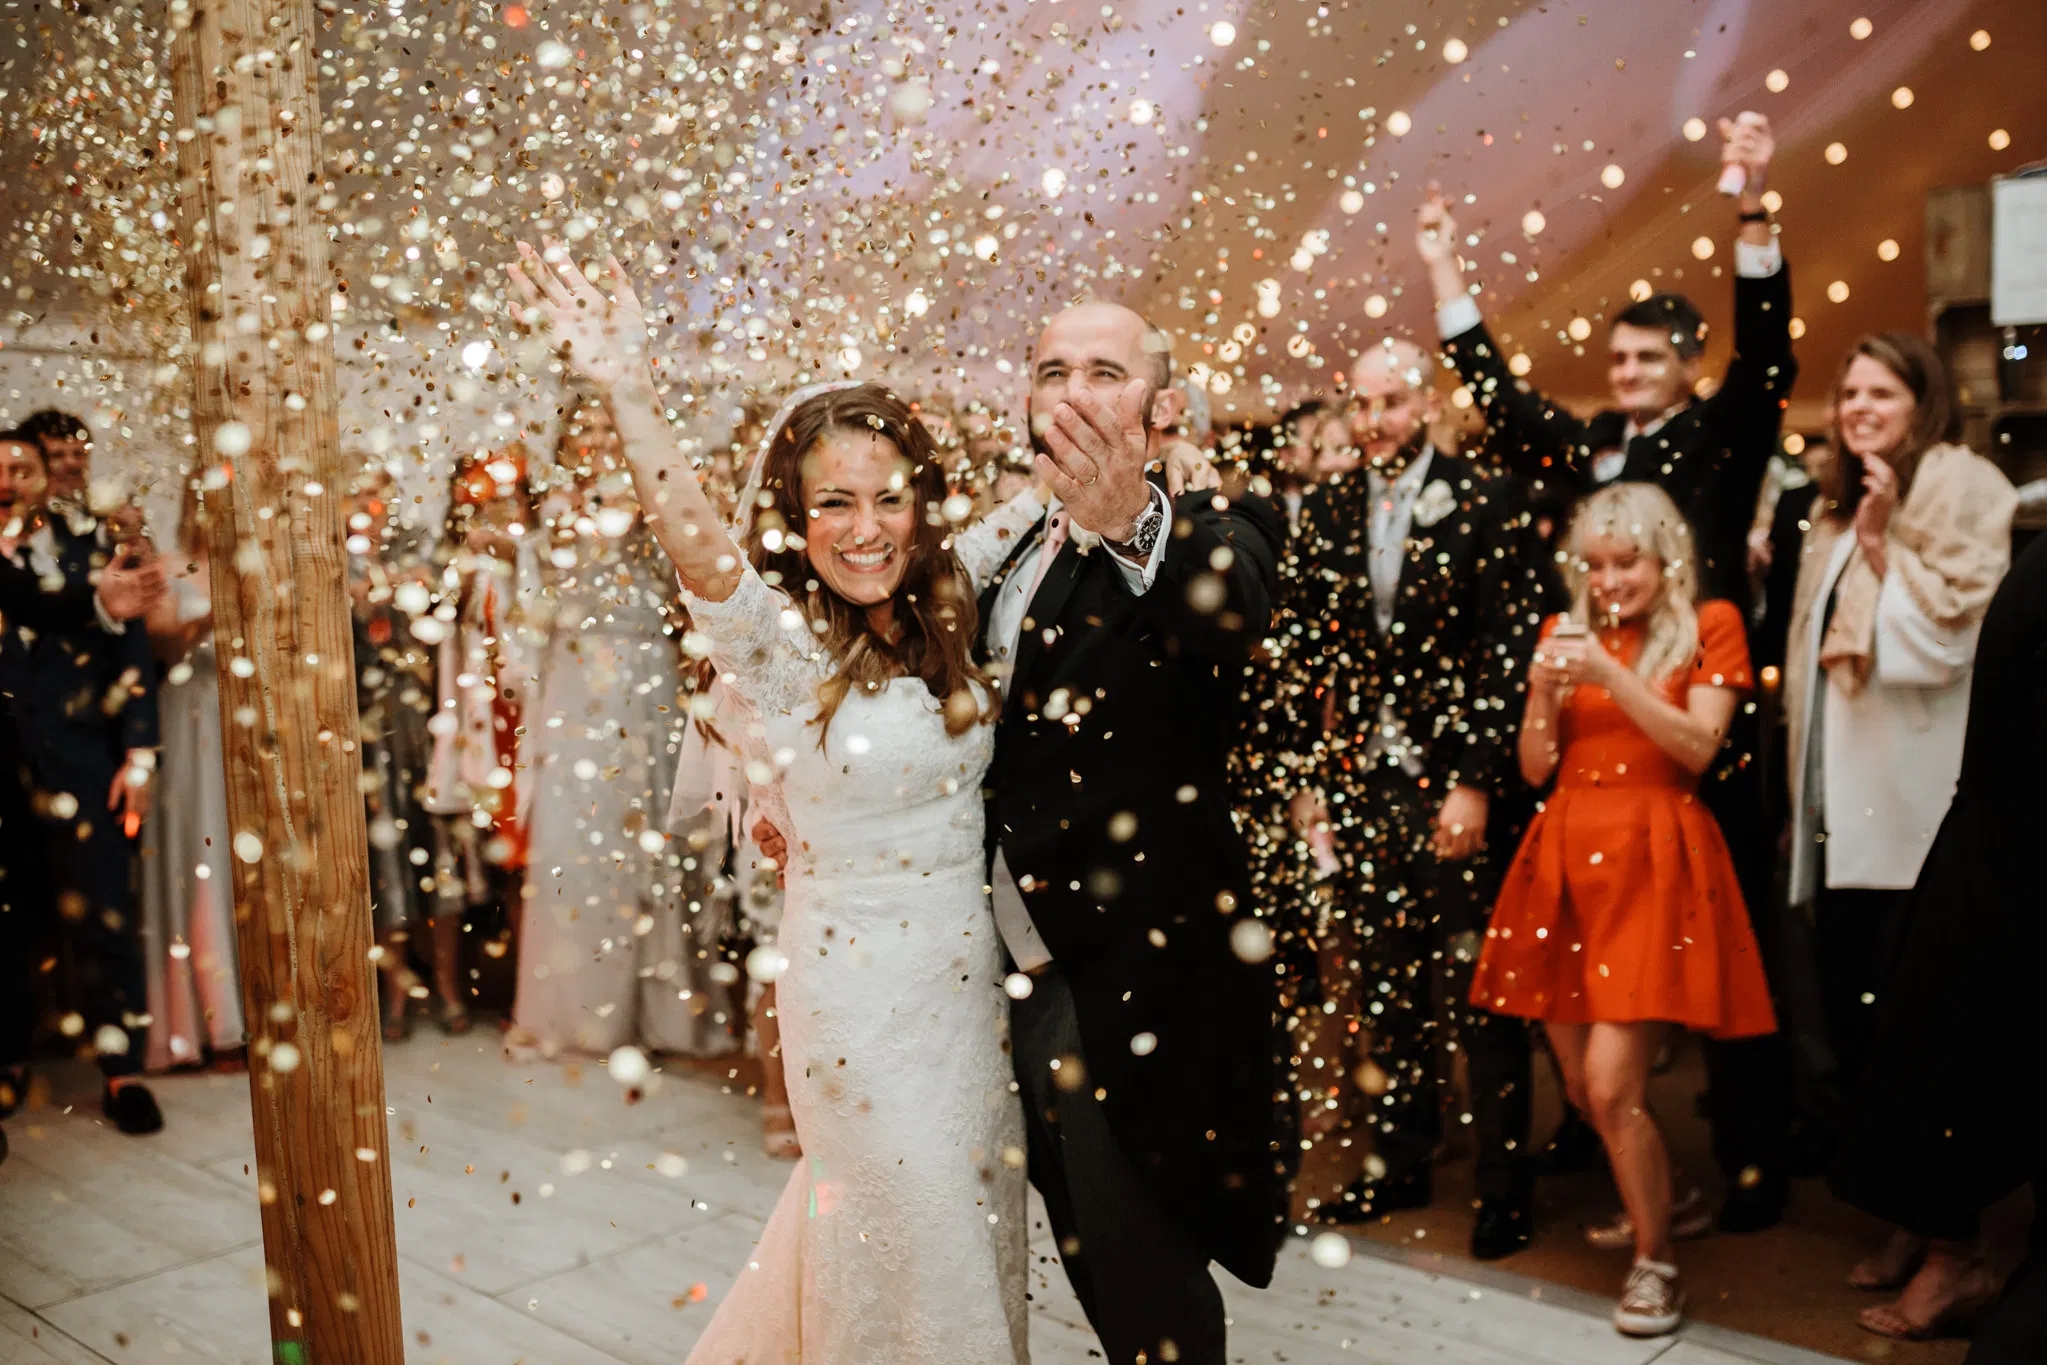 Can I Have A Romantic Dreamy Wedding Without Spending Much?